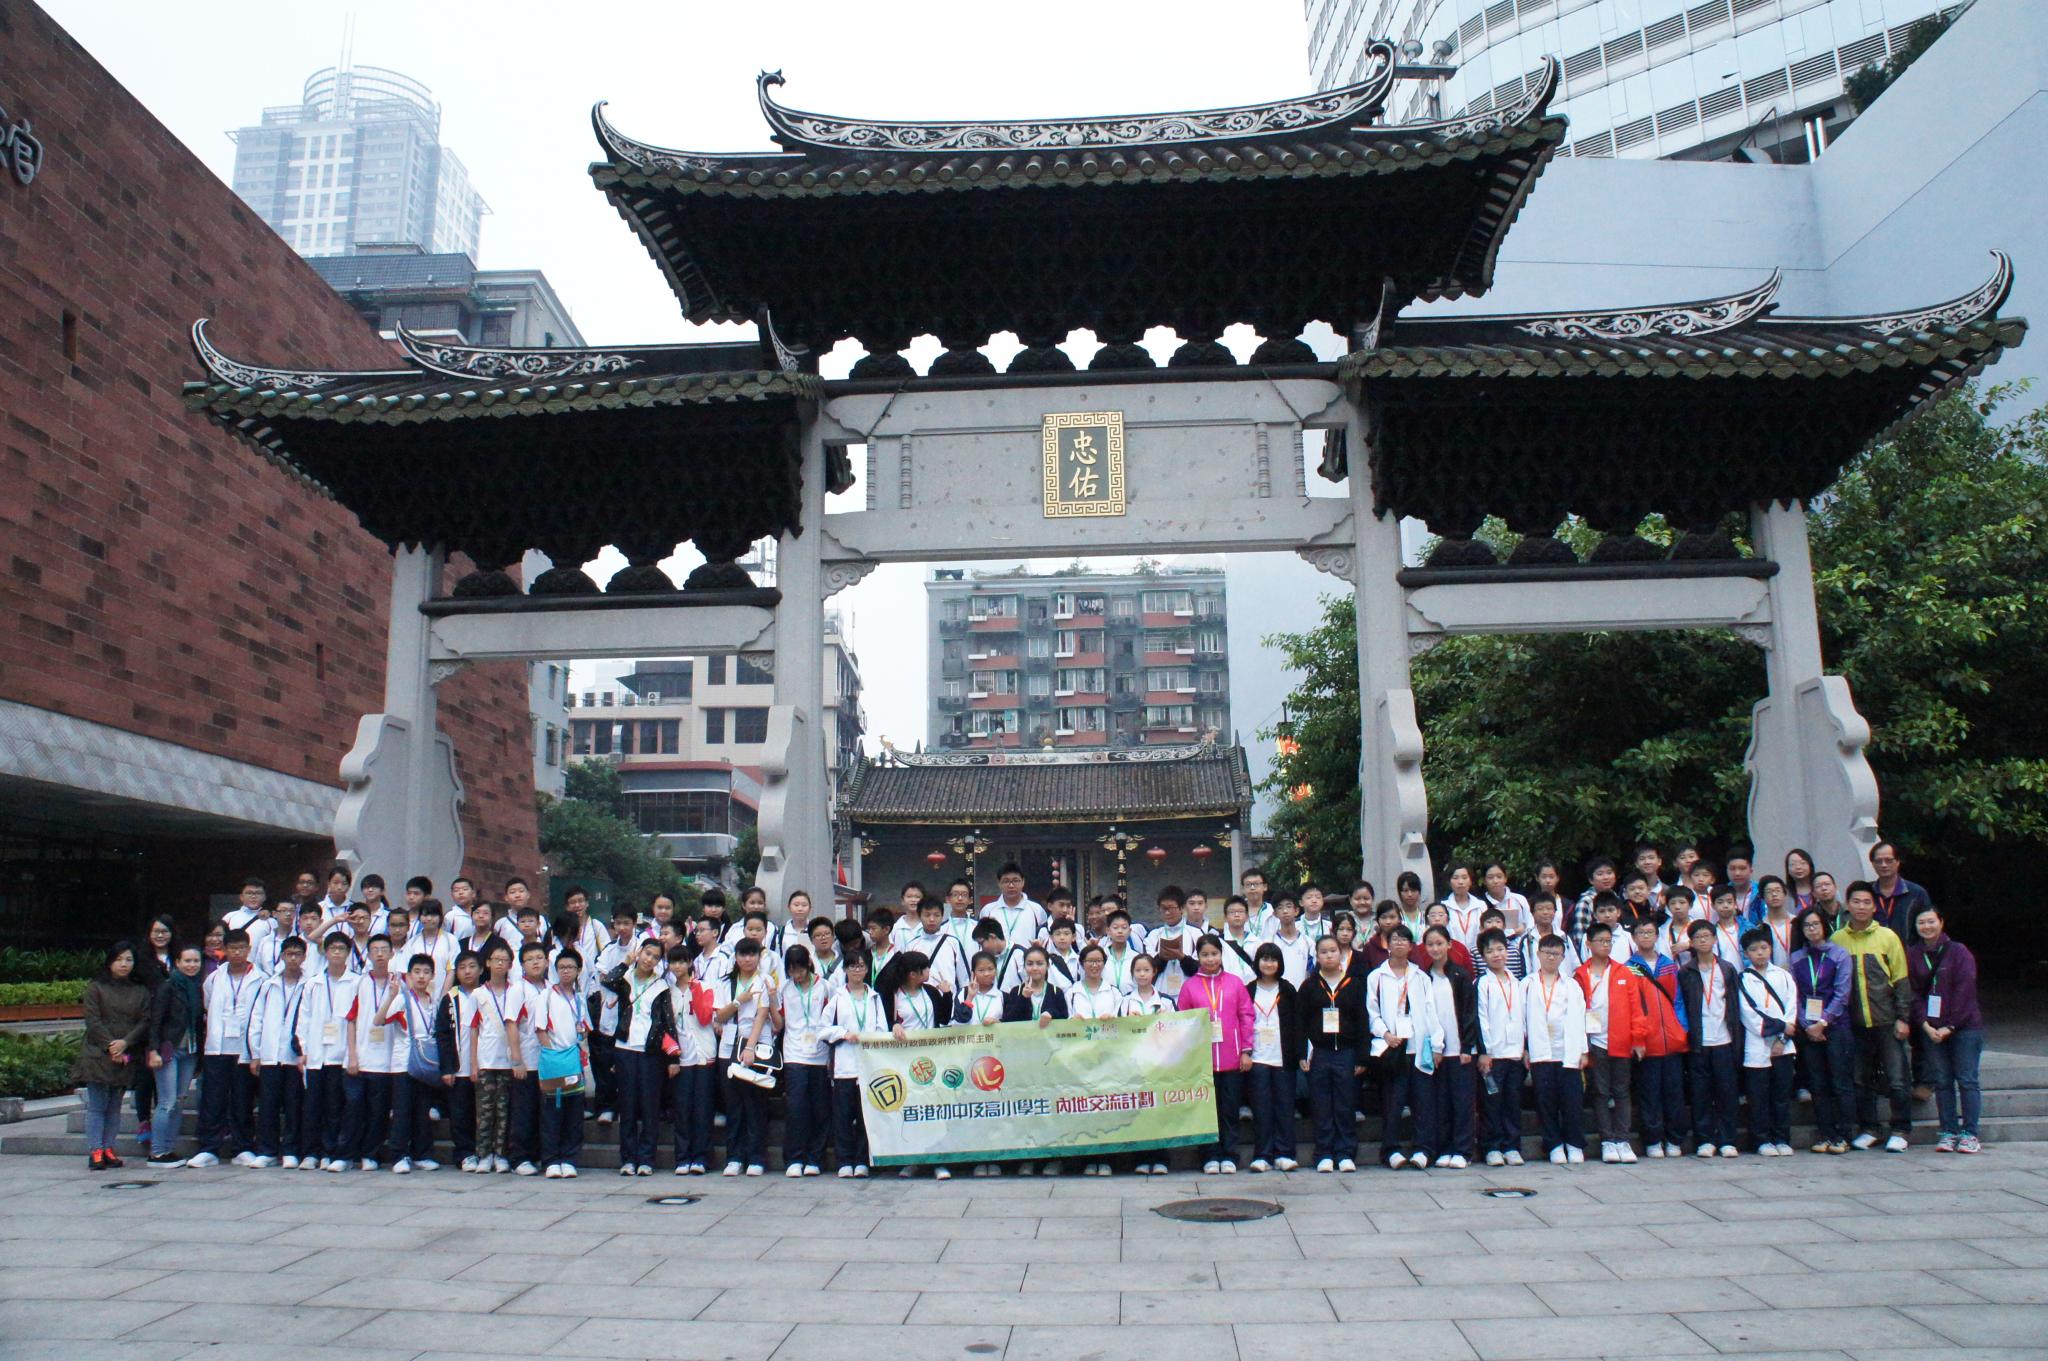 The students, teachers and tour guides are posing for a group photo together.